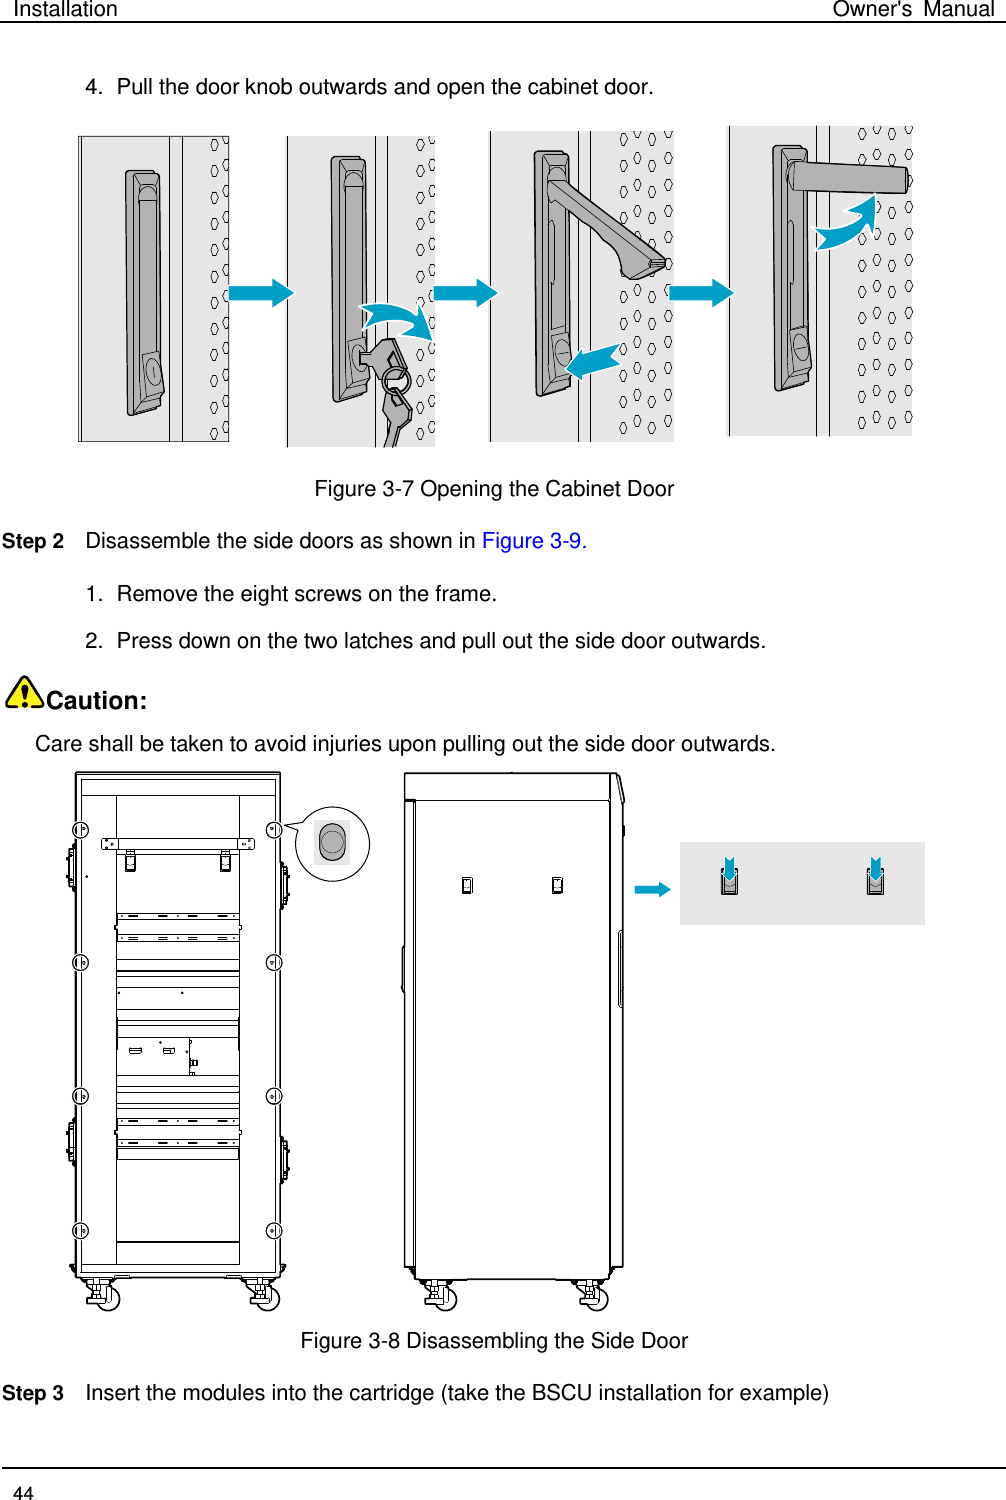 Installation Owner&apos;s Manual  44  4. Pull the door knob outwards and open the cabinet door.    Figure 3-7 Opening the Cabinet Door Step 2 Disassemble the side doors as shown in Figure 3-9.     1. Remove the eight screws on the frame.   2. Press down on the two latches and pull out the side door outwards. Caution:   Care shall be taken to avoid injuries upon pulling out the side door outwards.    Figure 3-8 Disassembling the Side Door Step 3 Insert the modules into the cartridge (take the BSCU installation for example)   